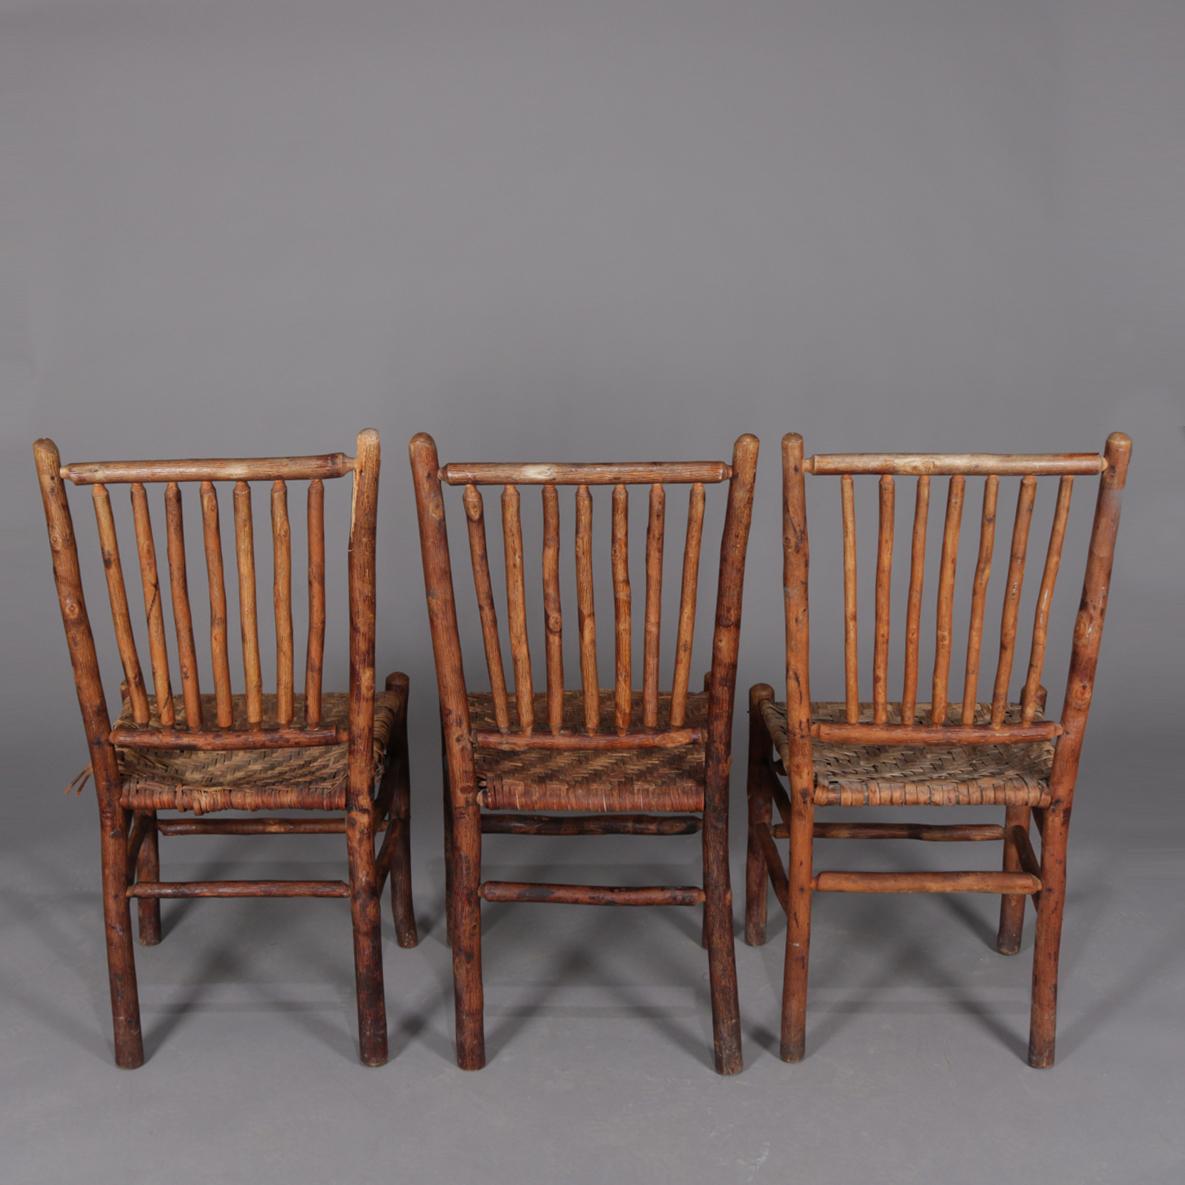 Antique hand carved Adirondack side chairs by Old Hickory features branch form frames with rush seats, signed, circa 1900.

Measures: 38.5